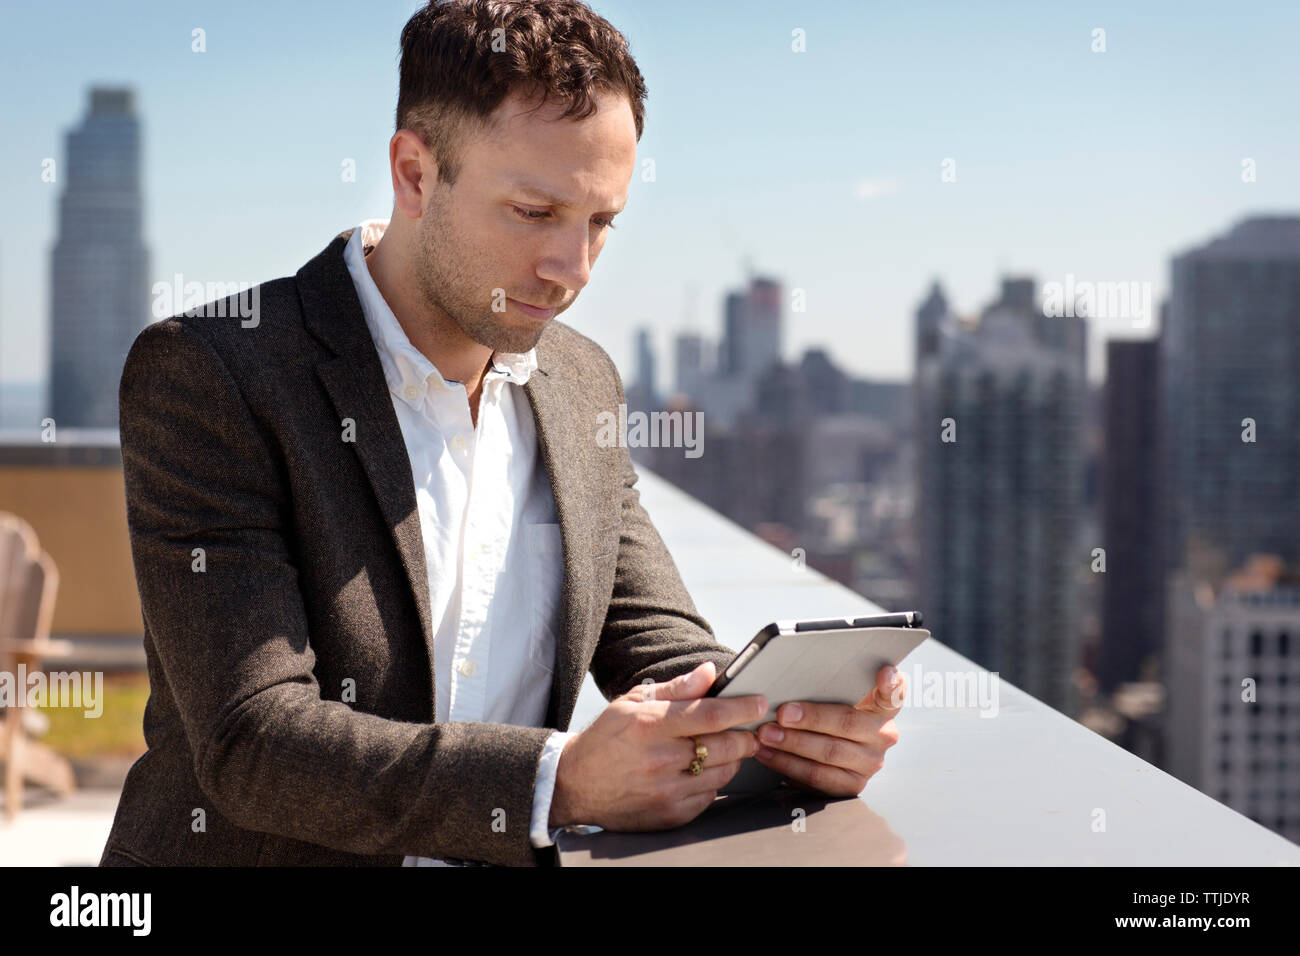 businessman using tablet computer on building terrace Stock Photo